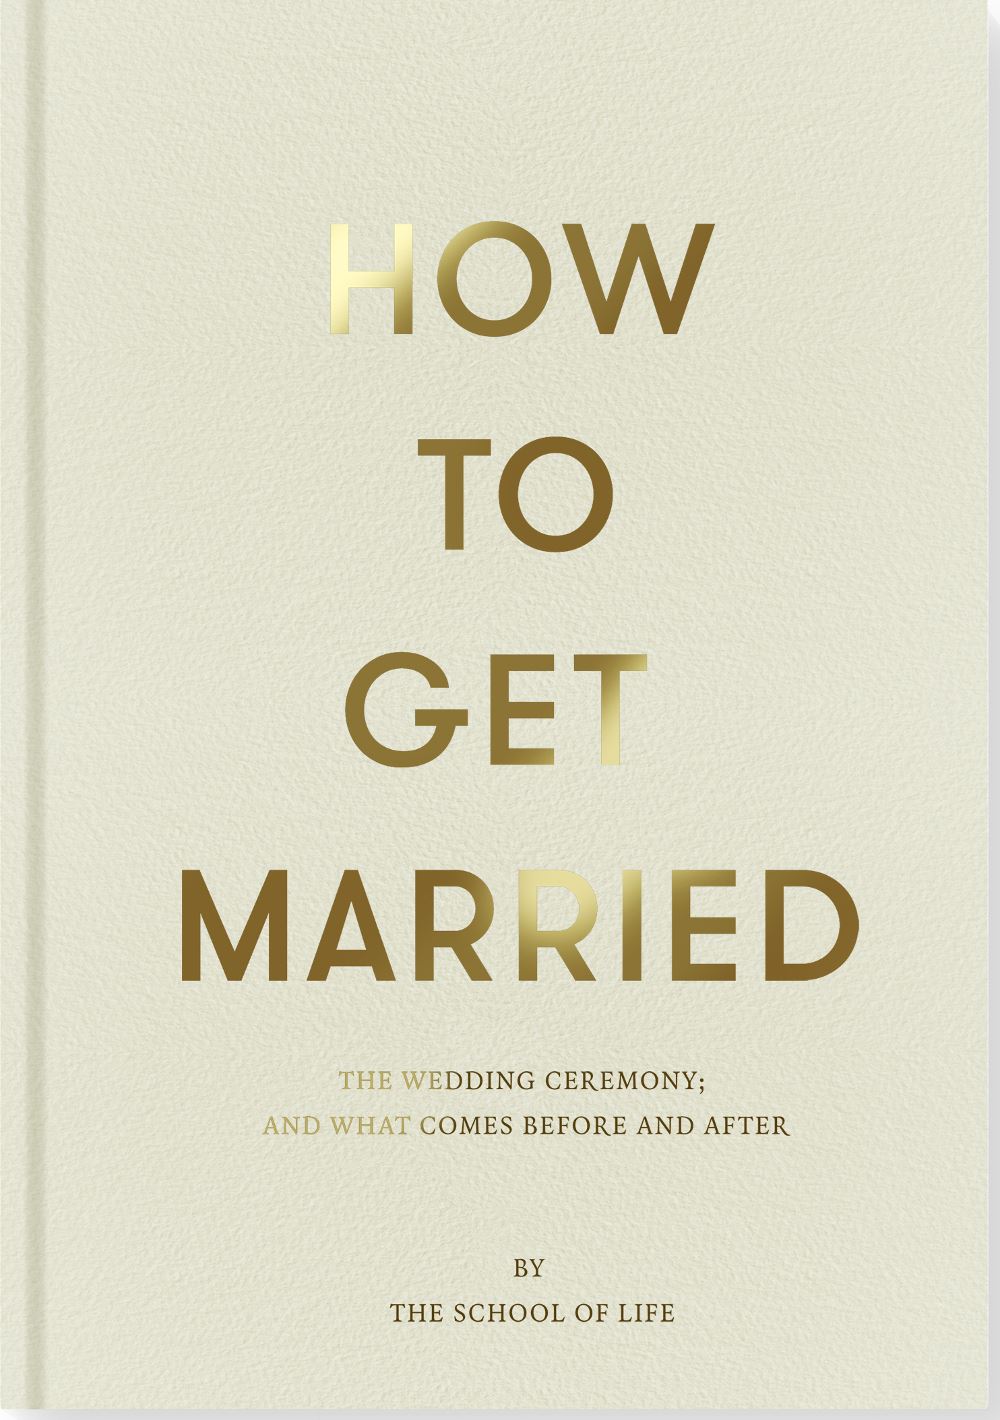 (School of Life) How to Get Married